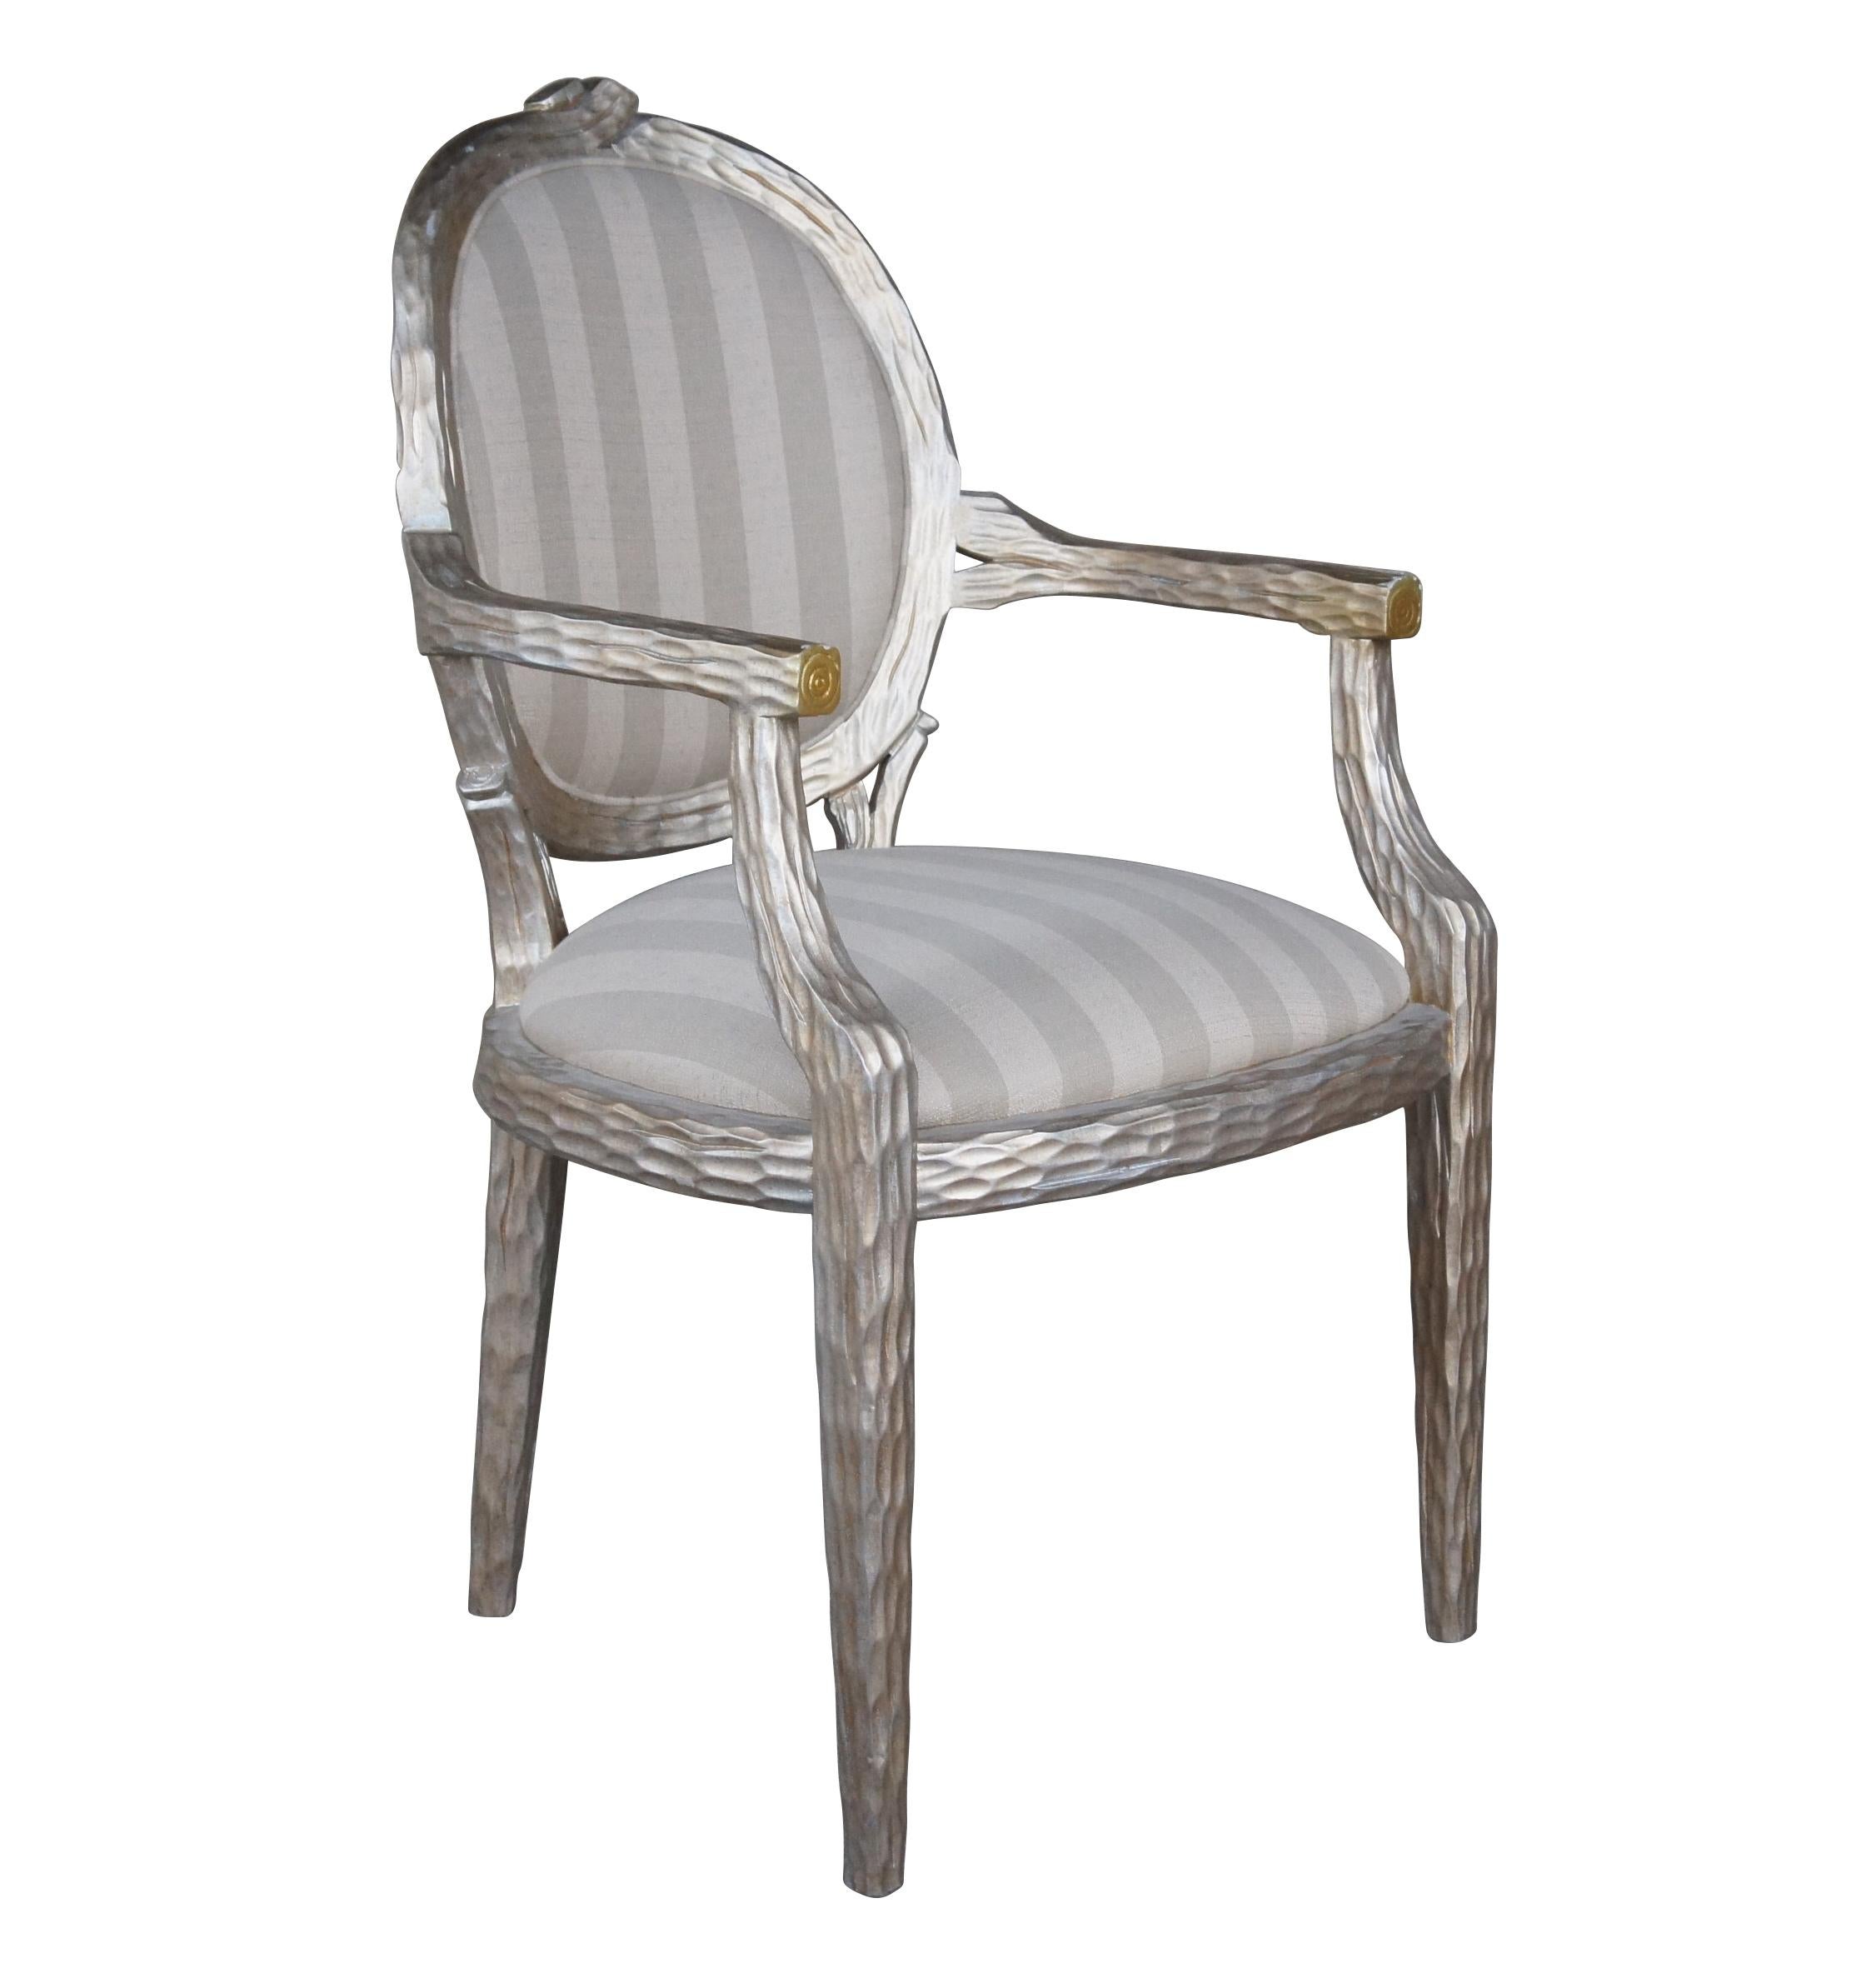 6 Italian Regency Faux Bois Branch Twig Form Silver Striped Birch Dining Chairs In Good Condition For Sale In Dayton, OH